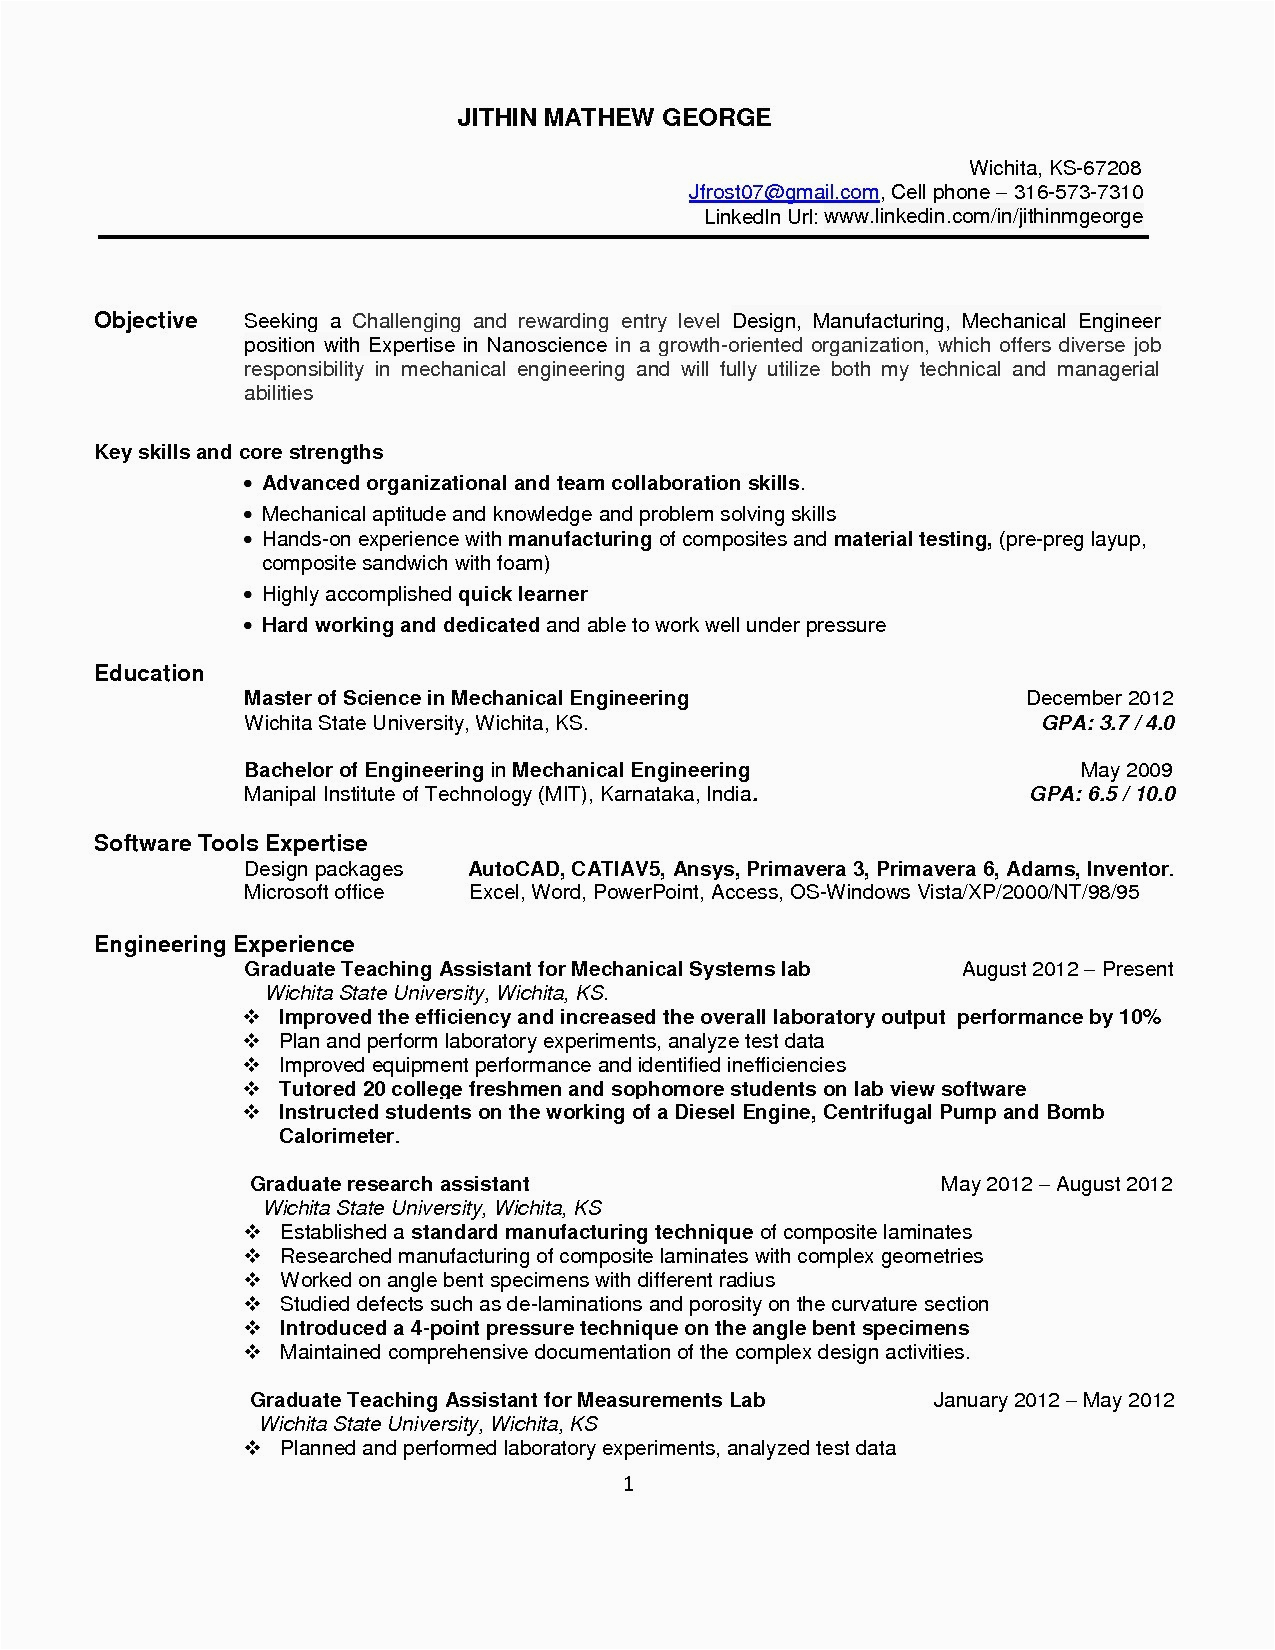 Sample Resume for Entry Level Electrical Engineer 14 Entry Level Electrical Engineer Resume Samples